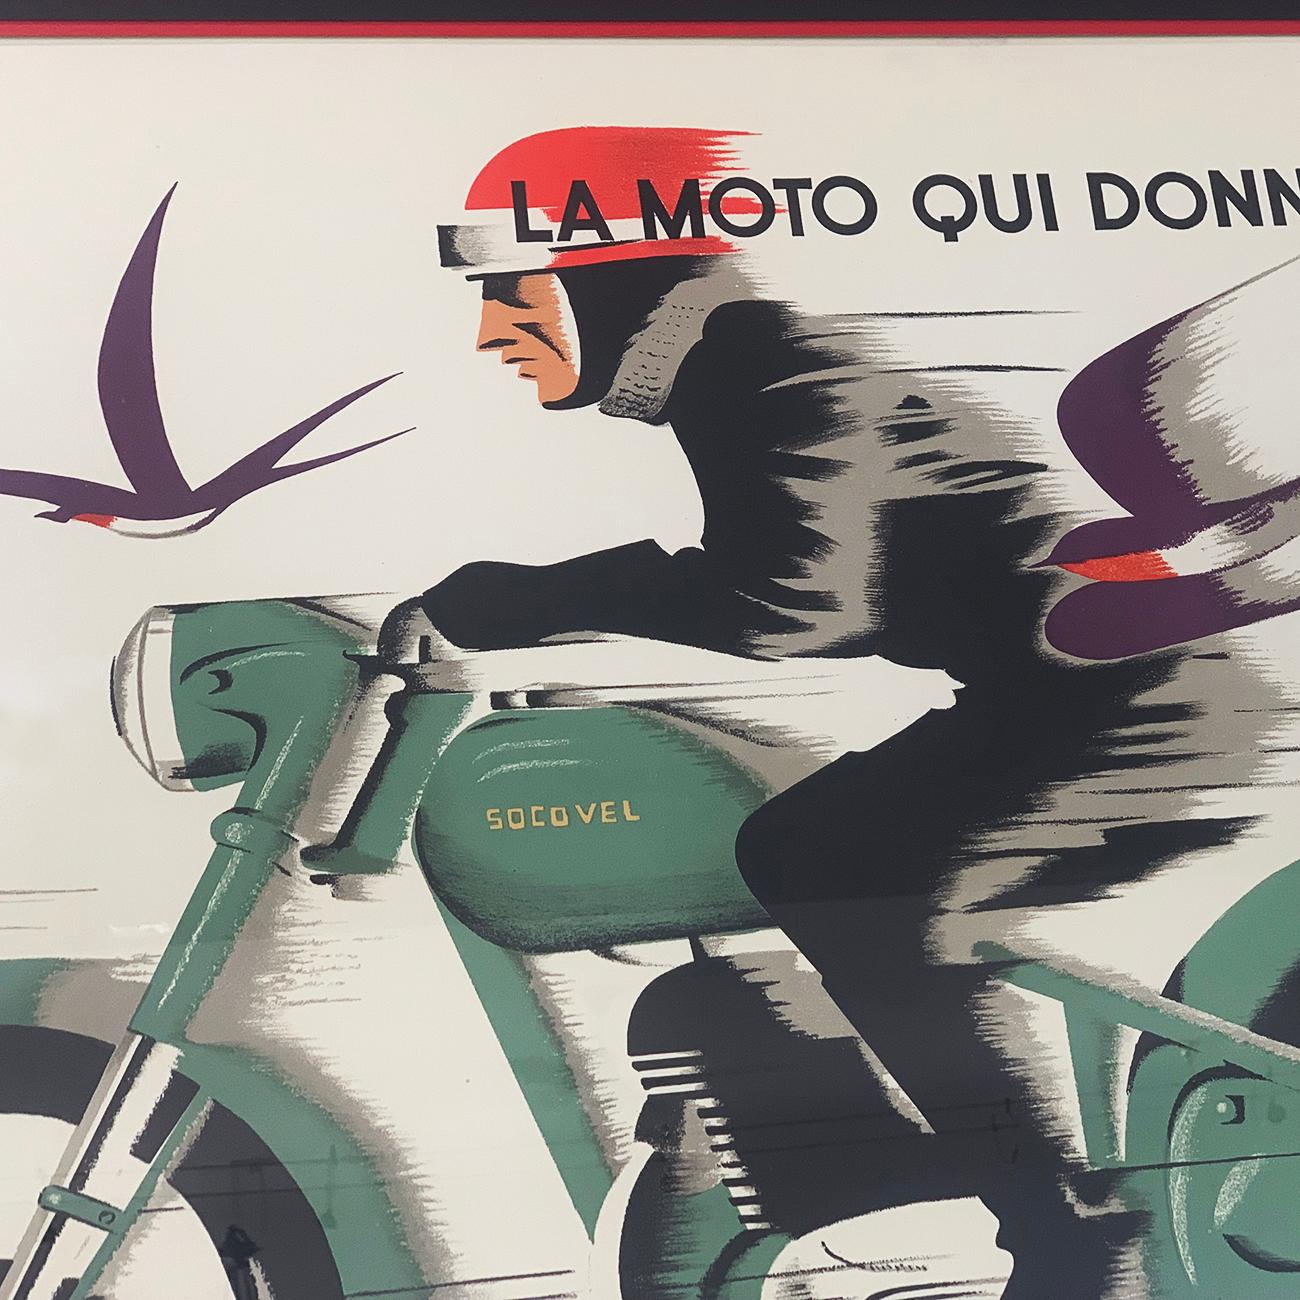 Midcentury poster, “Motorcycle” by Socovel Motorcycle Company Brussel, Belgium (Belgique) Europe. The Company was founded on March 4th 1941 by the brothers Maurice and Albert de Limette in Brussels. This Company was the first to create an Electric